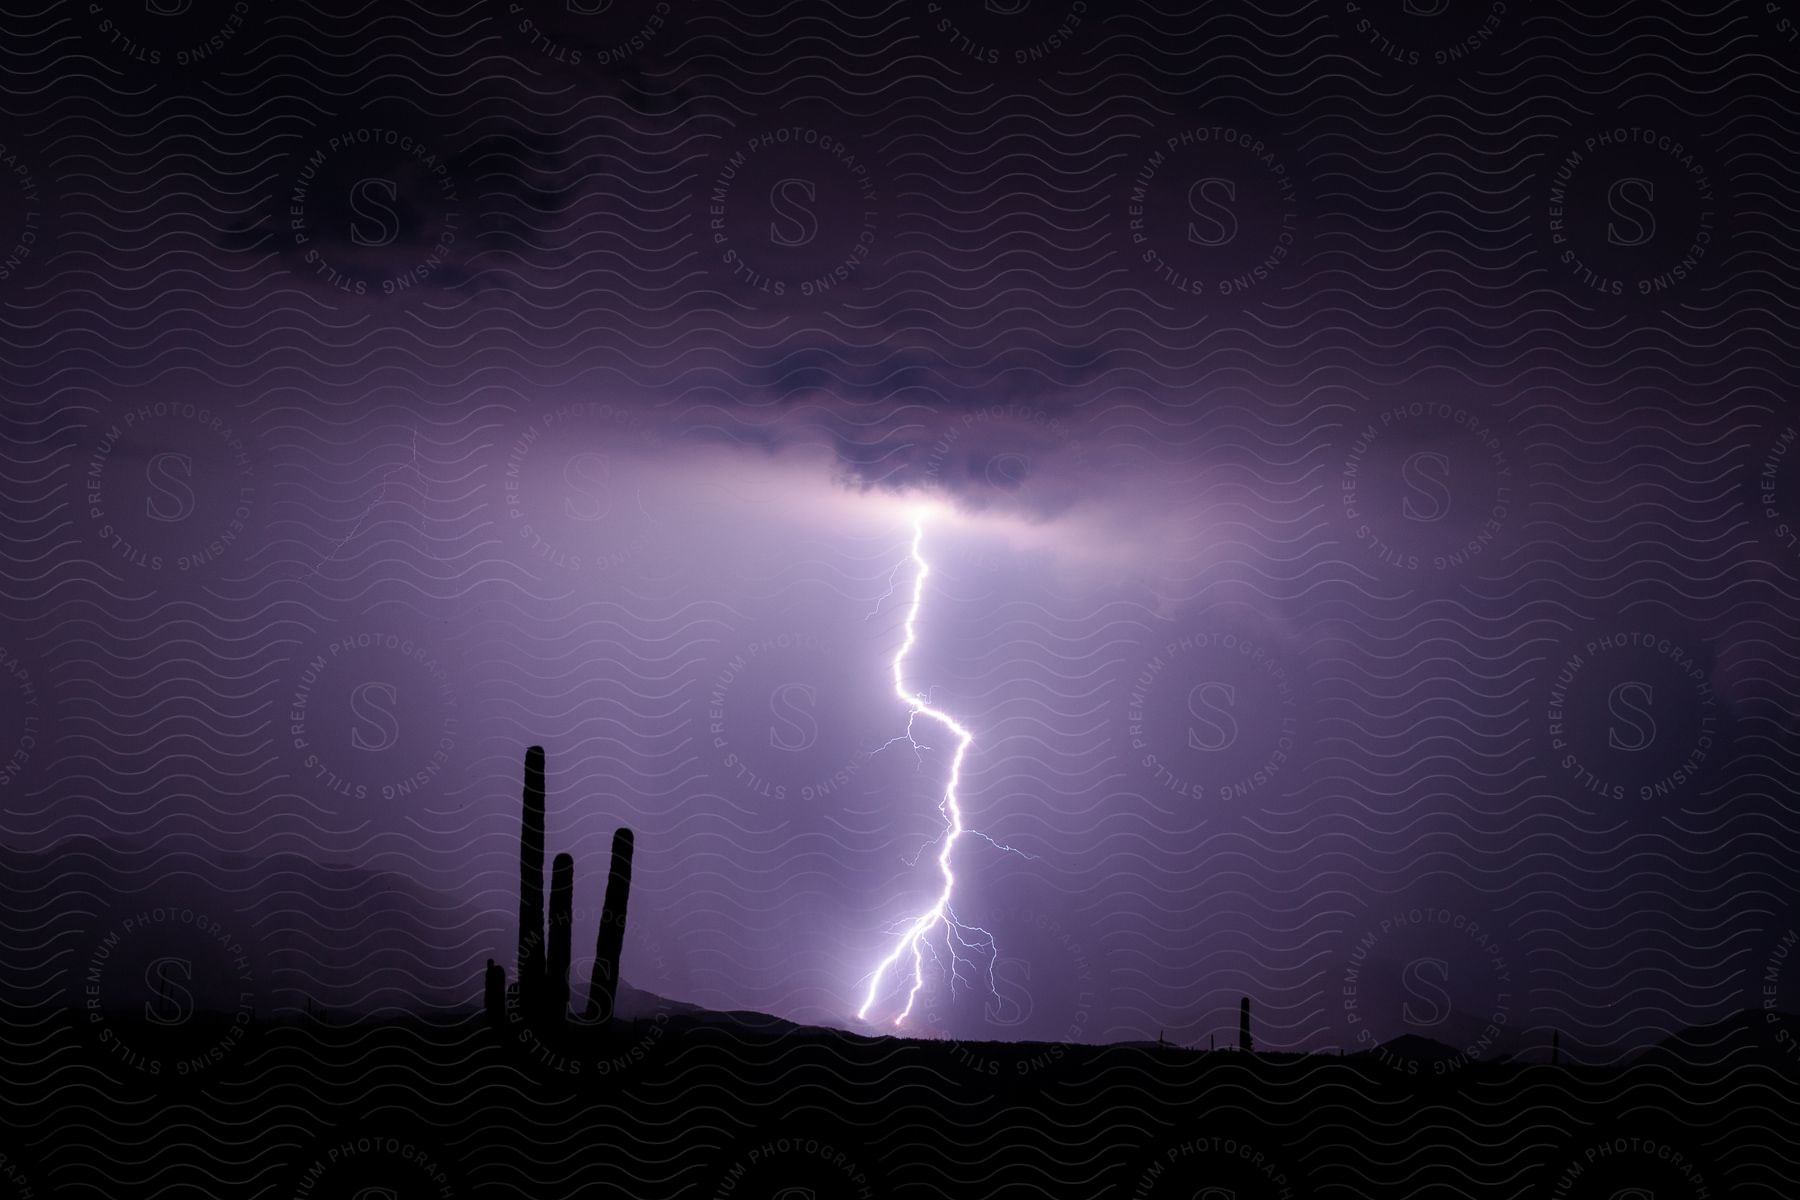 A thunderstorm at night over a dark natural landscape with two bolts hitting the side of the mountains